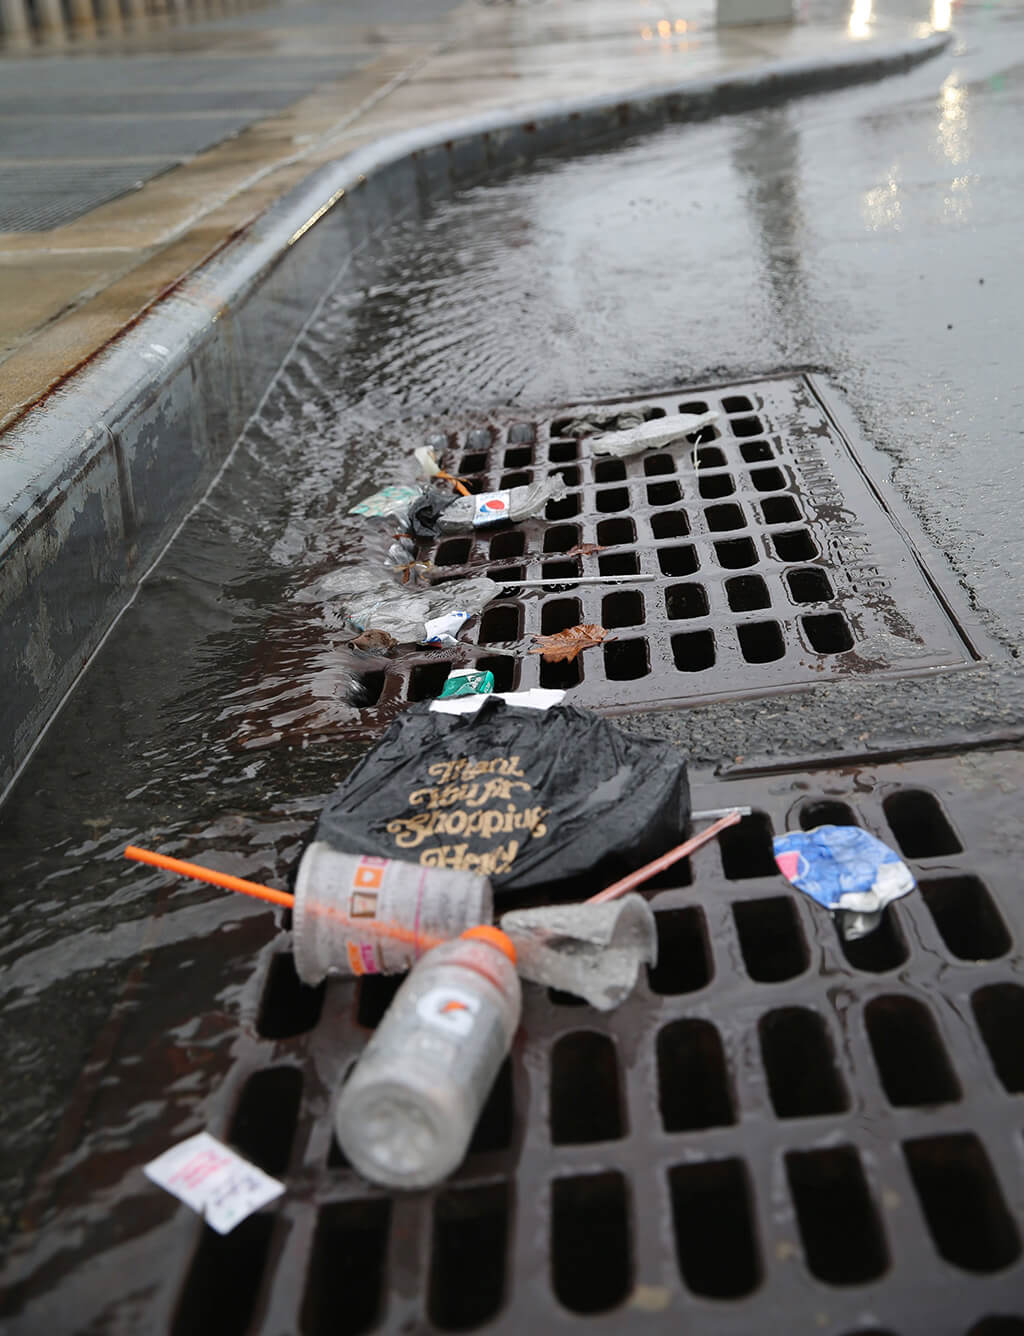 Trash in the drain on a street